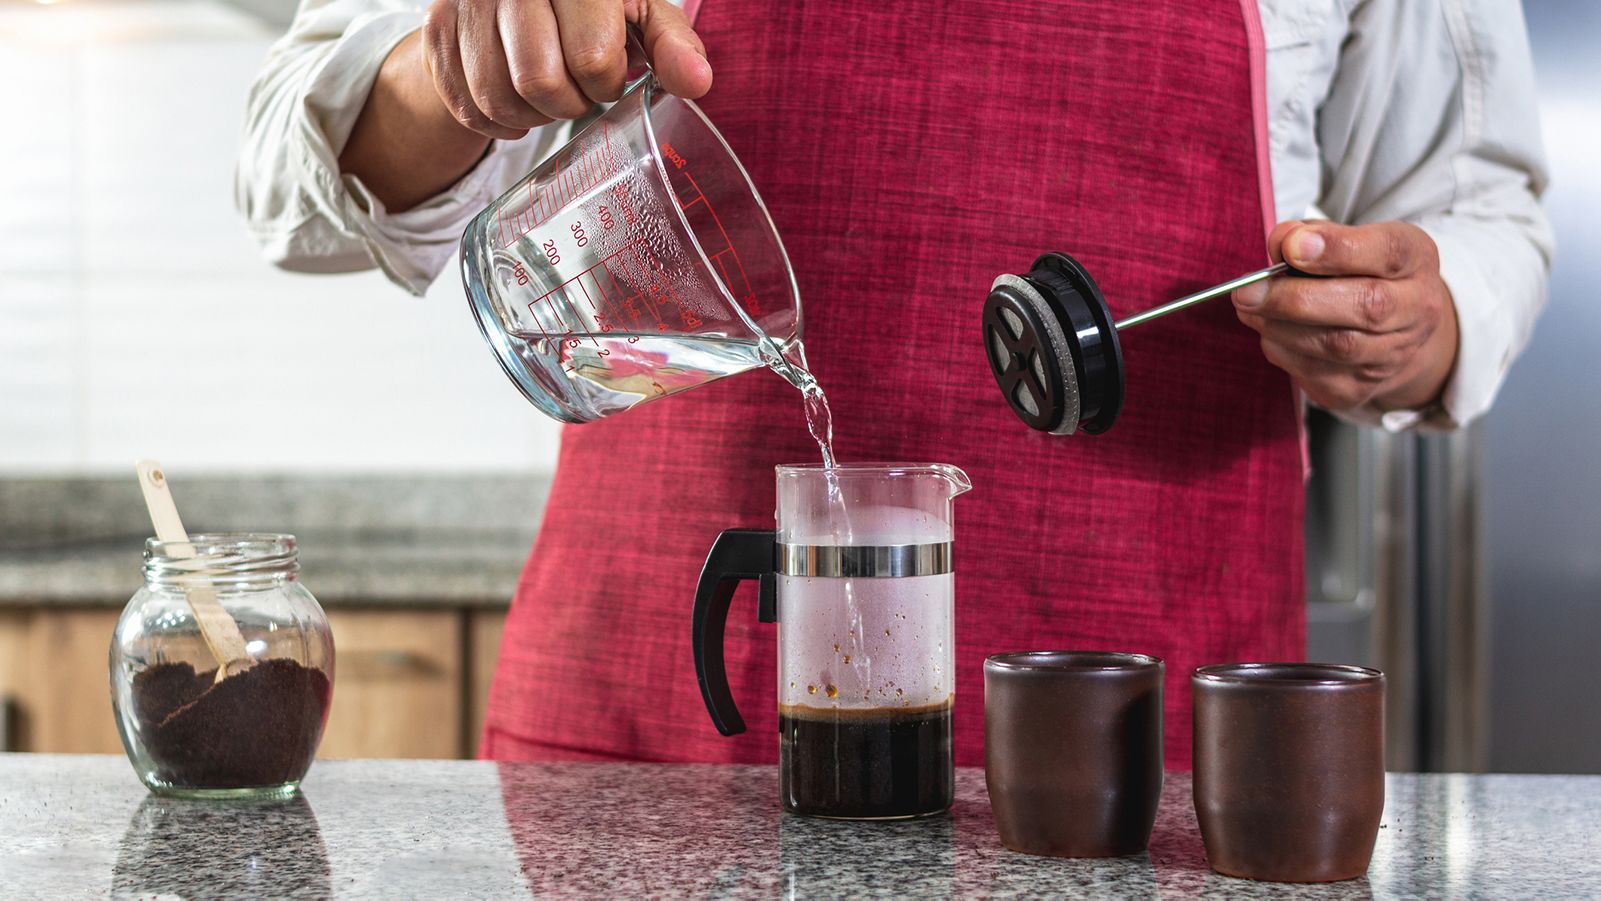 What to Do If Your Bodum French Press Glass Carafe Breaks